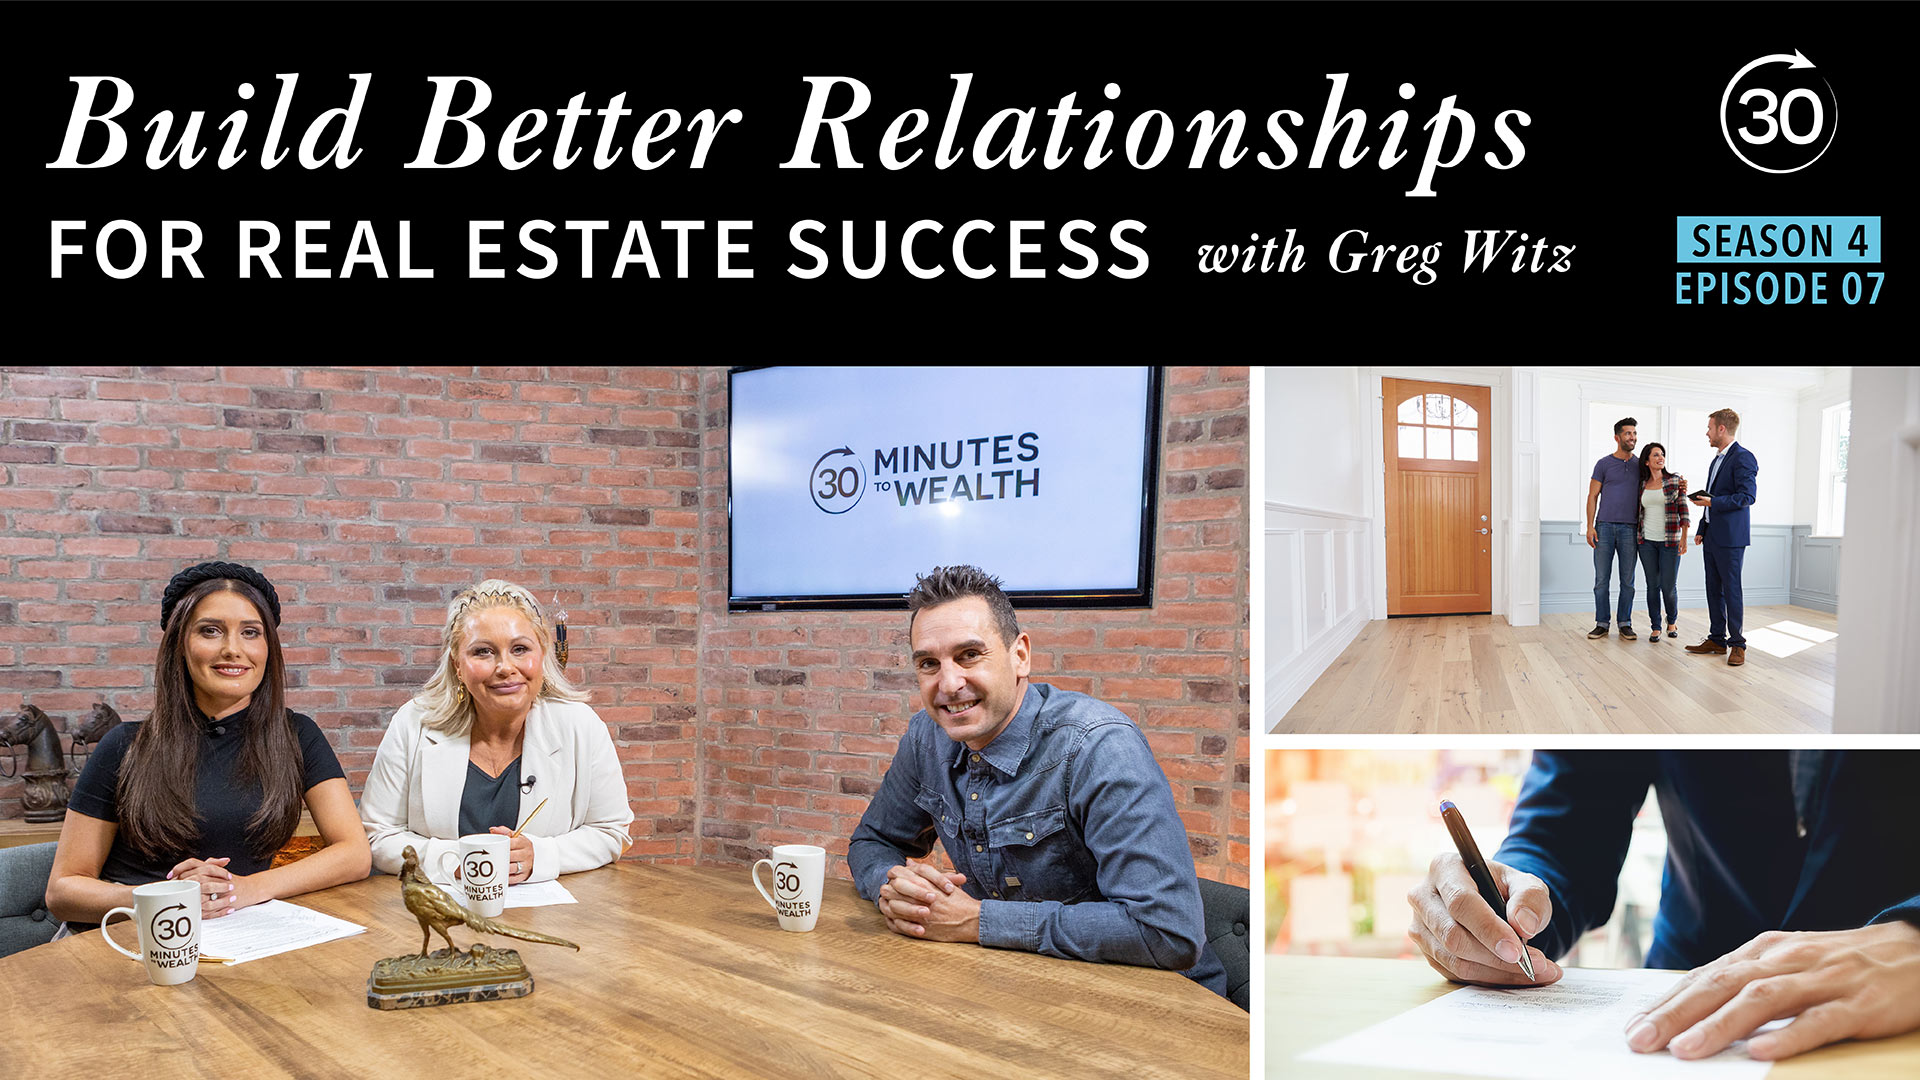 S4 E7 - Build Better Relationships for Real Estate Success